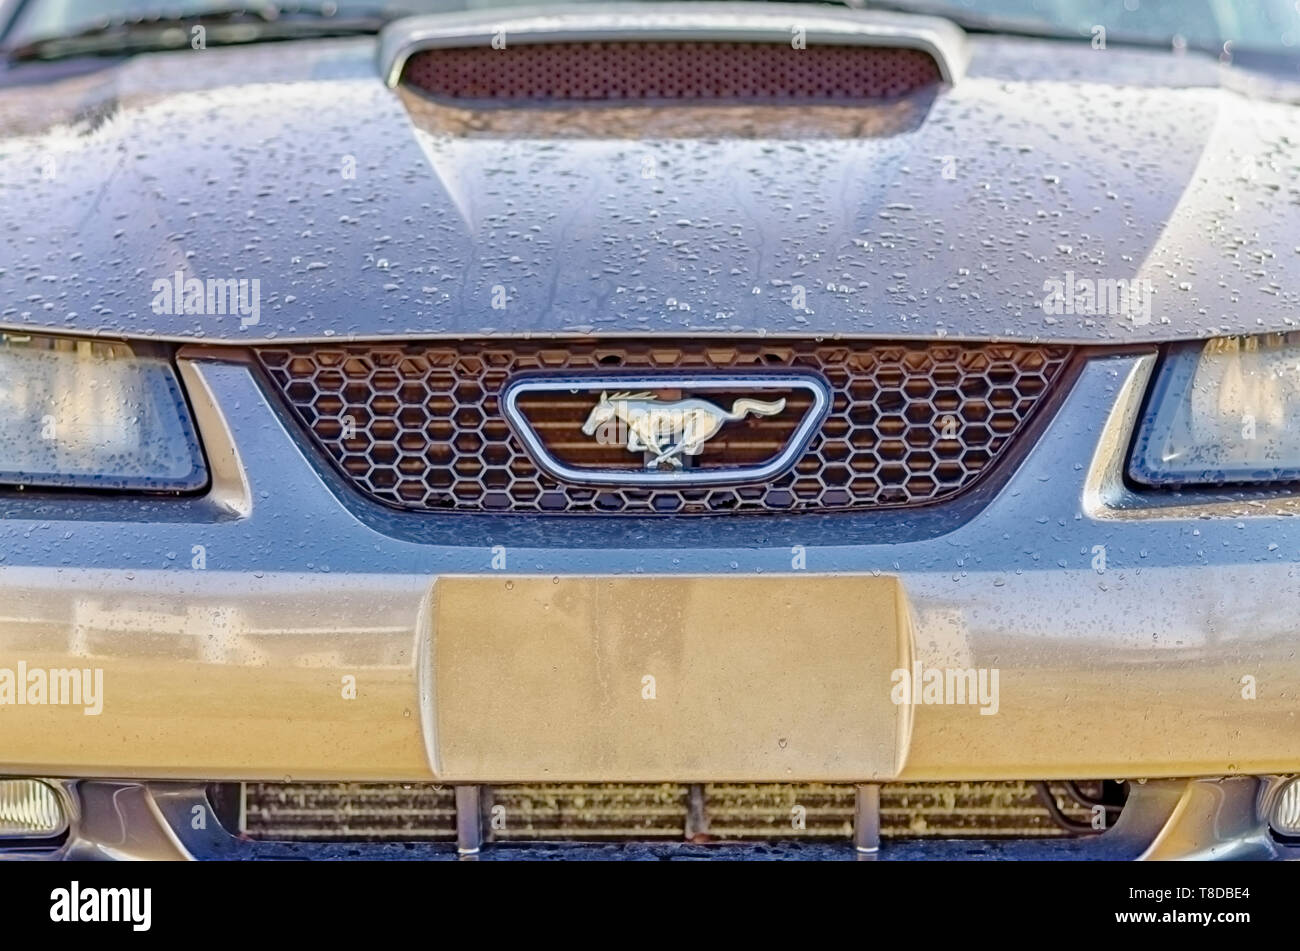 Rain water dripping off a Ford Mustang after a summer storm. Stock Photo